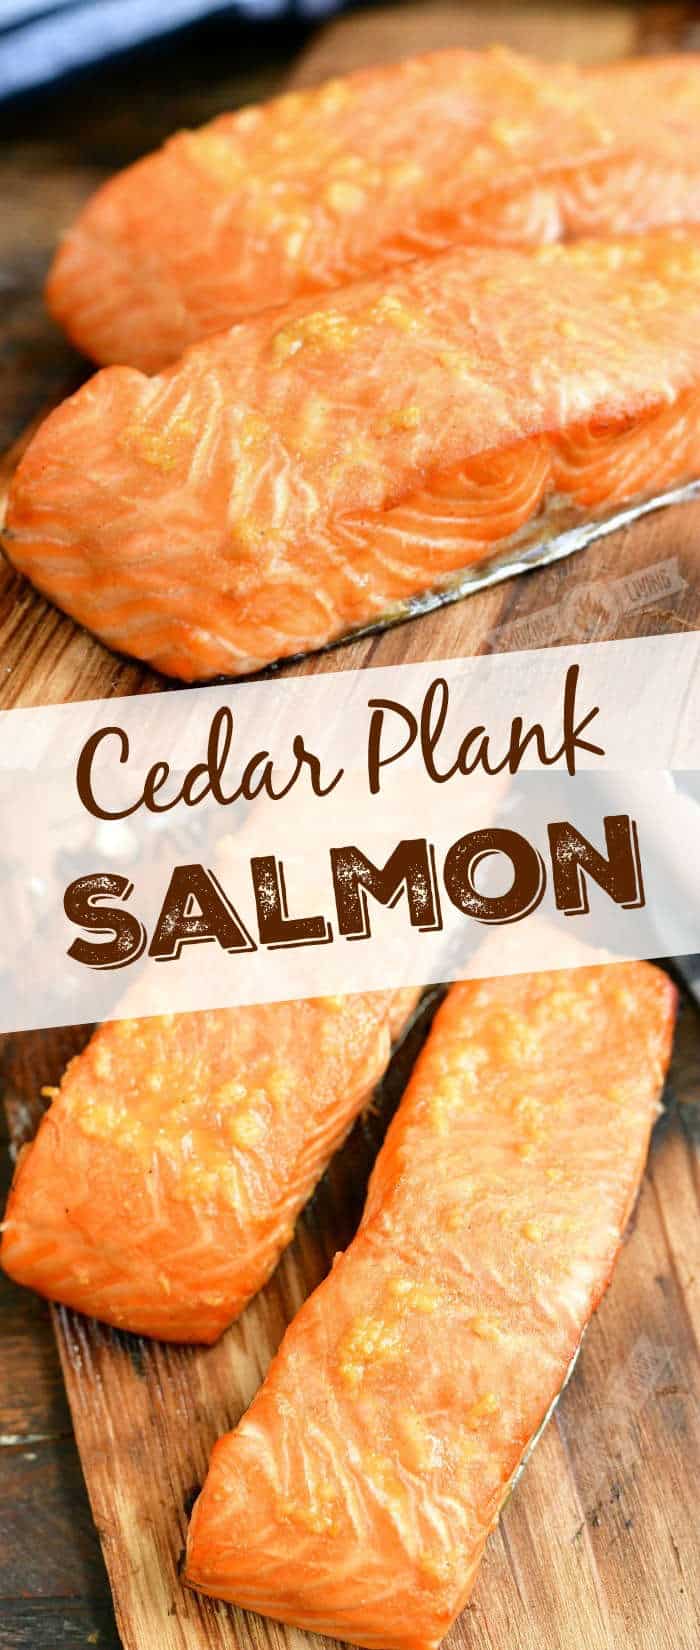 collage of two images of grilled salmon on a singed wood plank